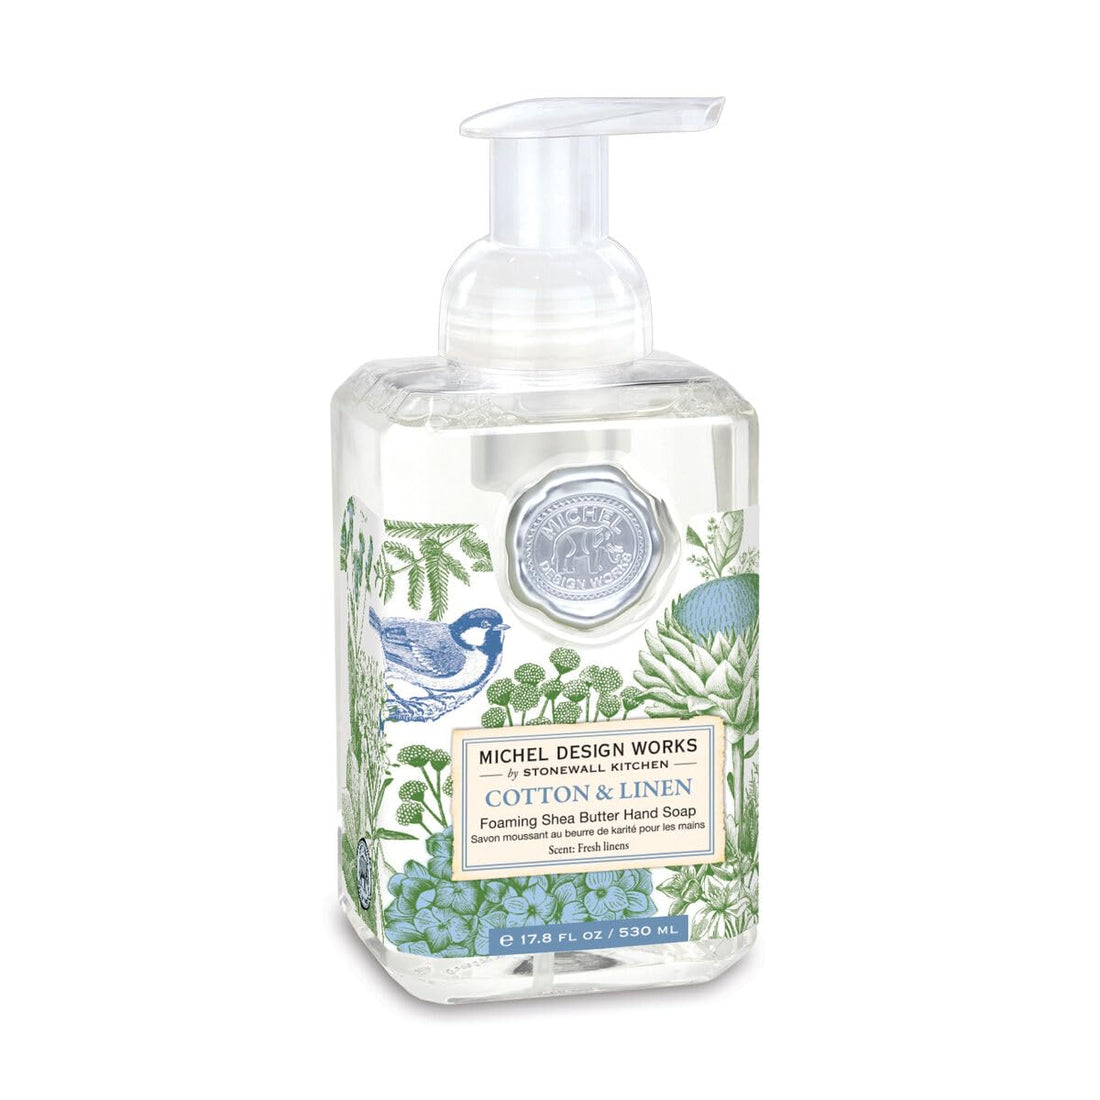 Michel Design Works Foaming Hand Soap 17.8oz, Cotton &amp; Linen Scent and Design, Shea Butter and Aloe Vera Blend, Beautiful Square Container with Pump